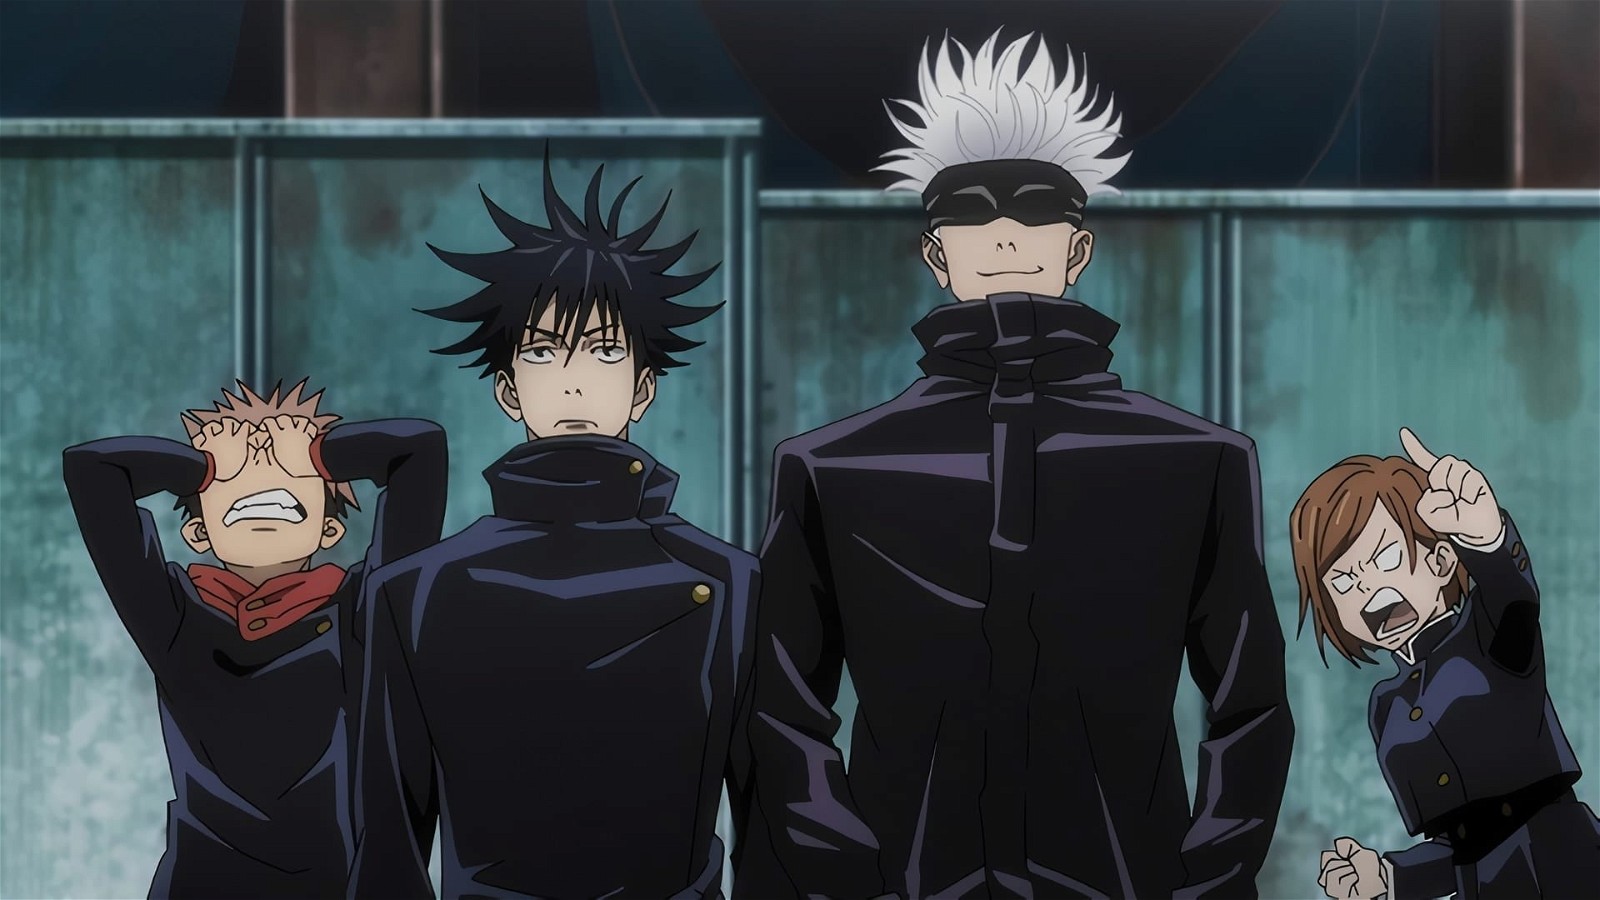 The Main Cast of Jujutsu Kaisen will Appear in Fortnite